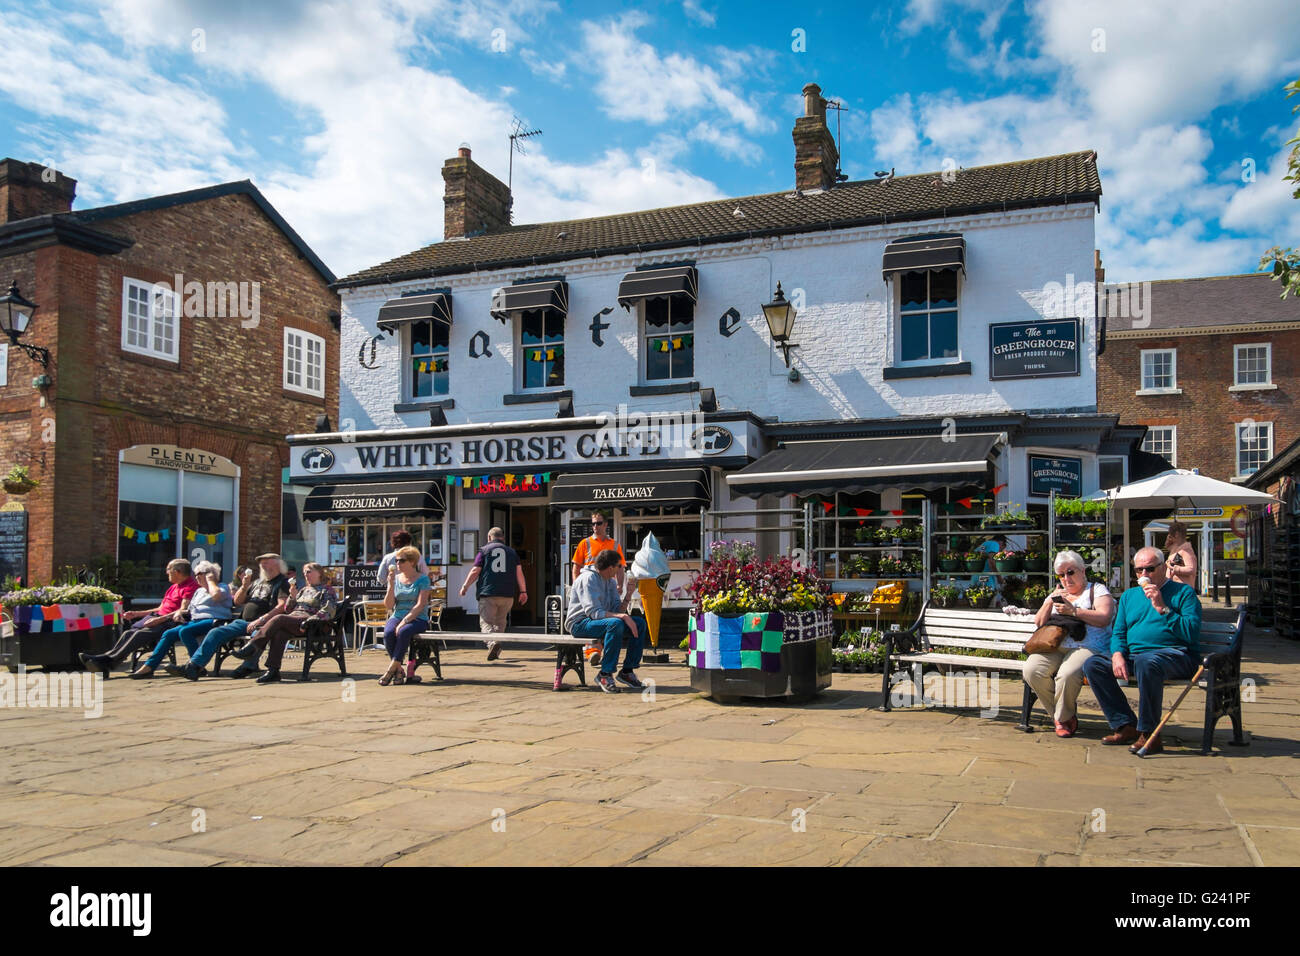 People relaxing with ice creams outside the White Horse Café in Thirsk Market Place in the town centre on a warm spring day Stock Photo